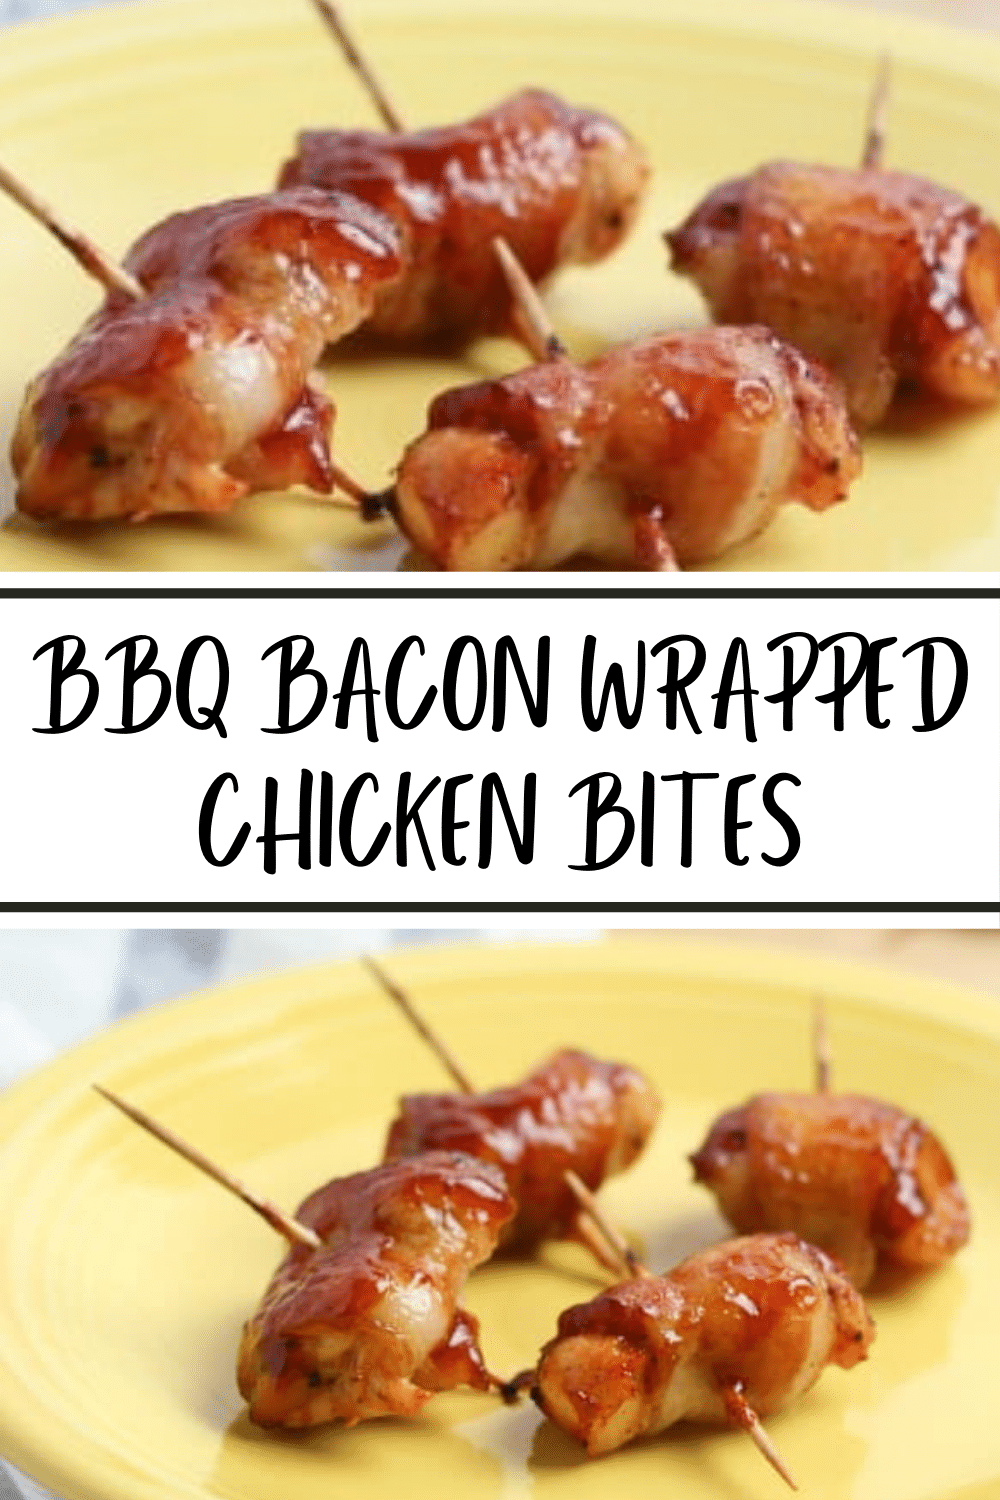 BBQ Bacon Wrapped Chicken Bites are the perfect appetizer for any party. This is an easy appetizer recipe and they will fly off the platter! #bacon #appetizers #partyfood #chicken via @wondermomwannab